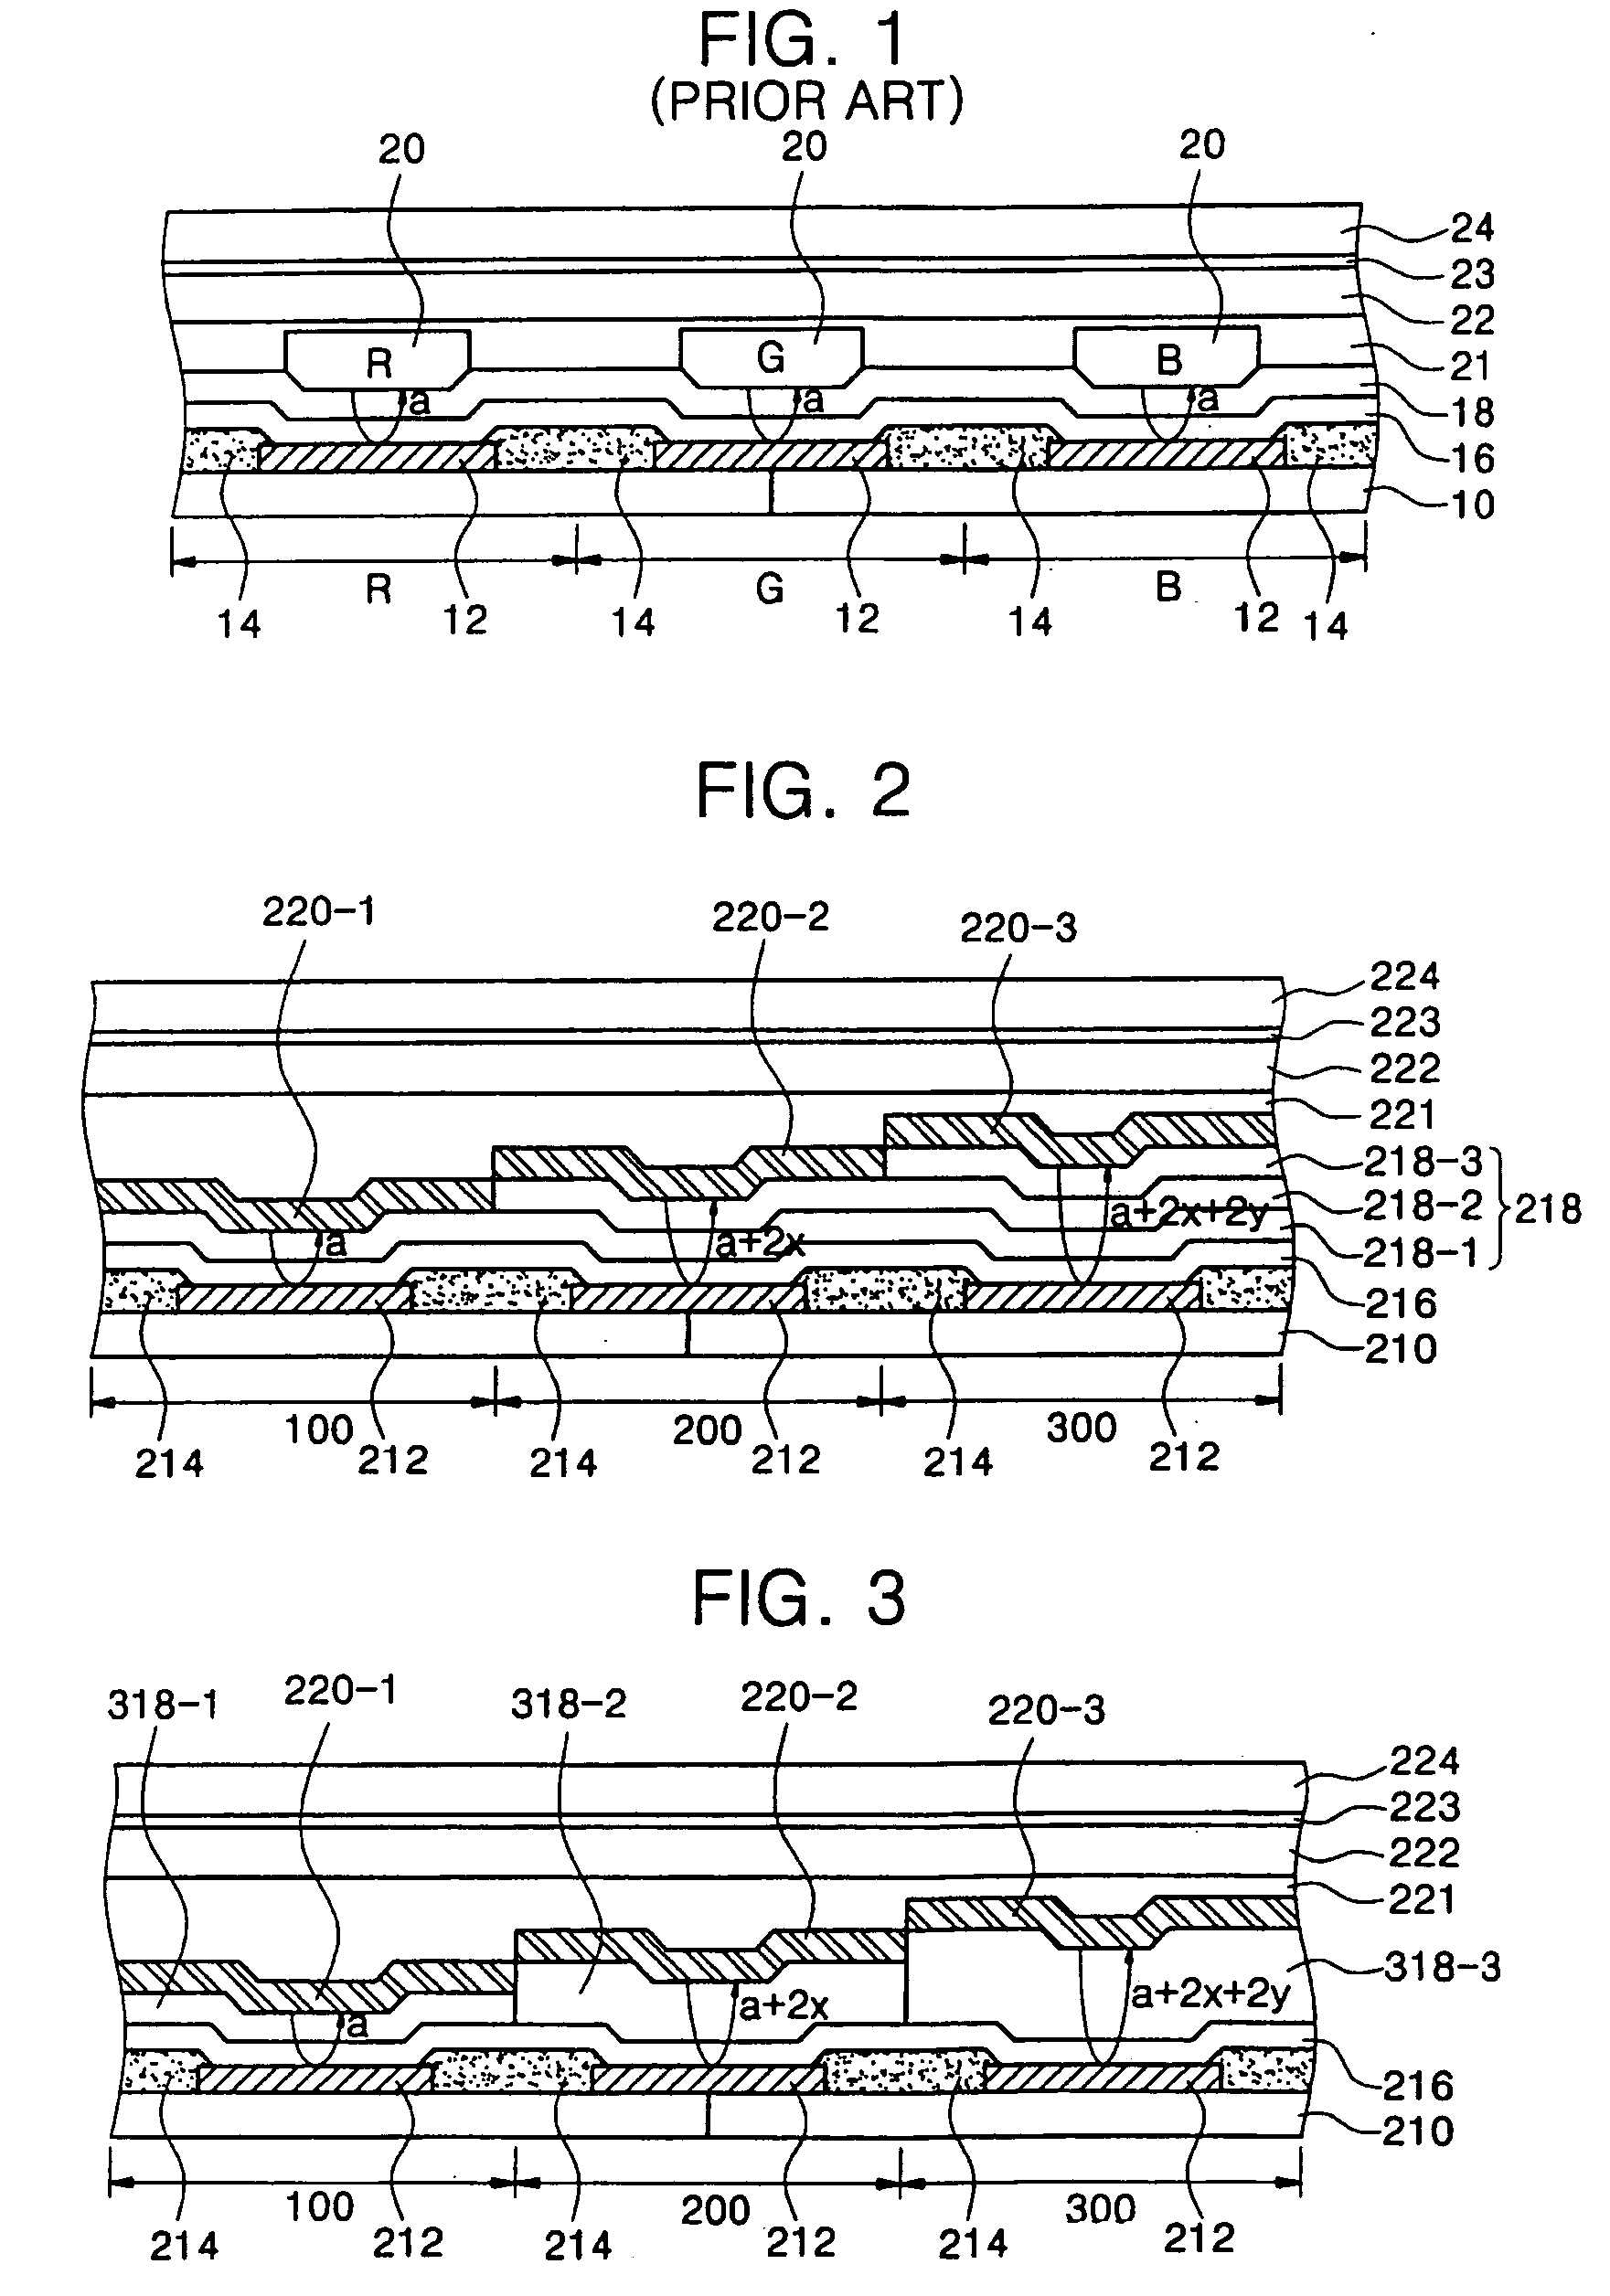 Organic electroluminescent display device and method for fabricating the same